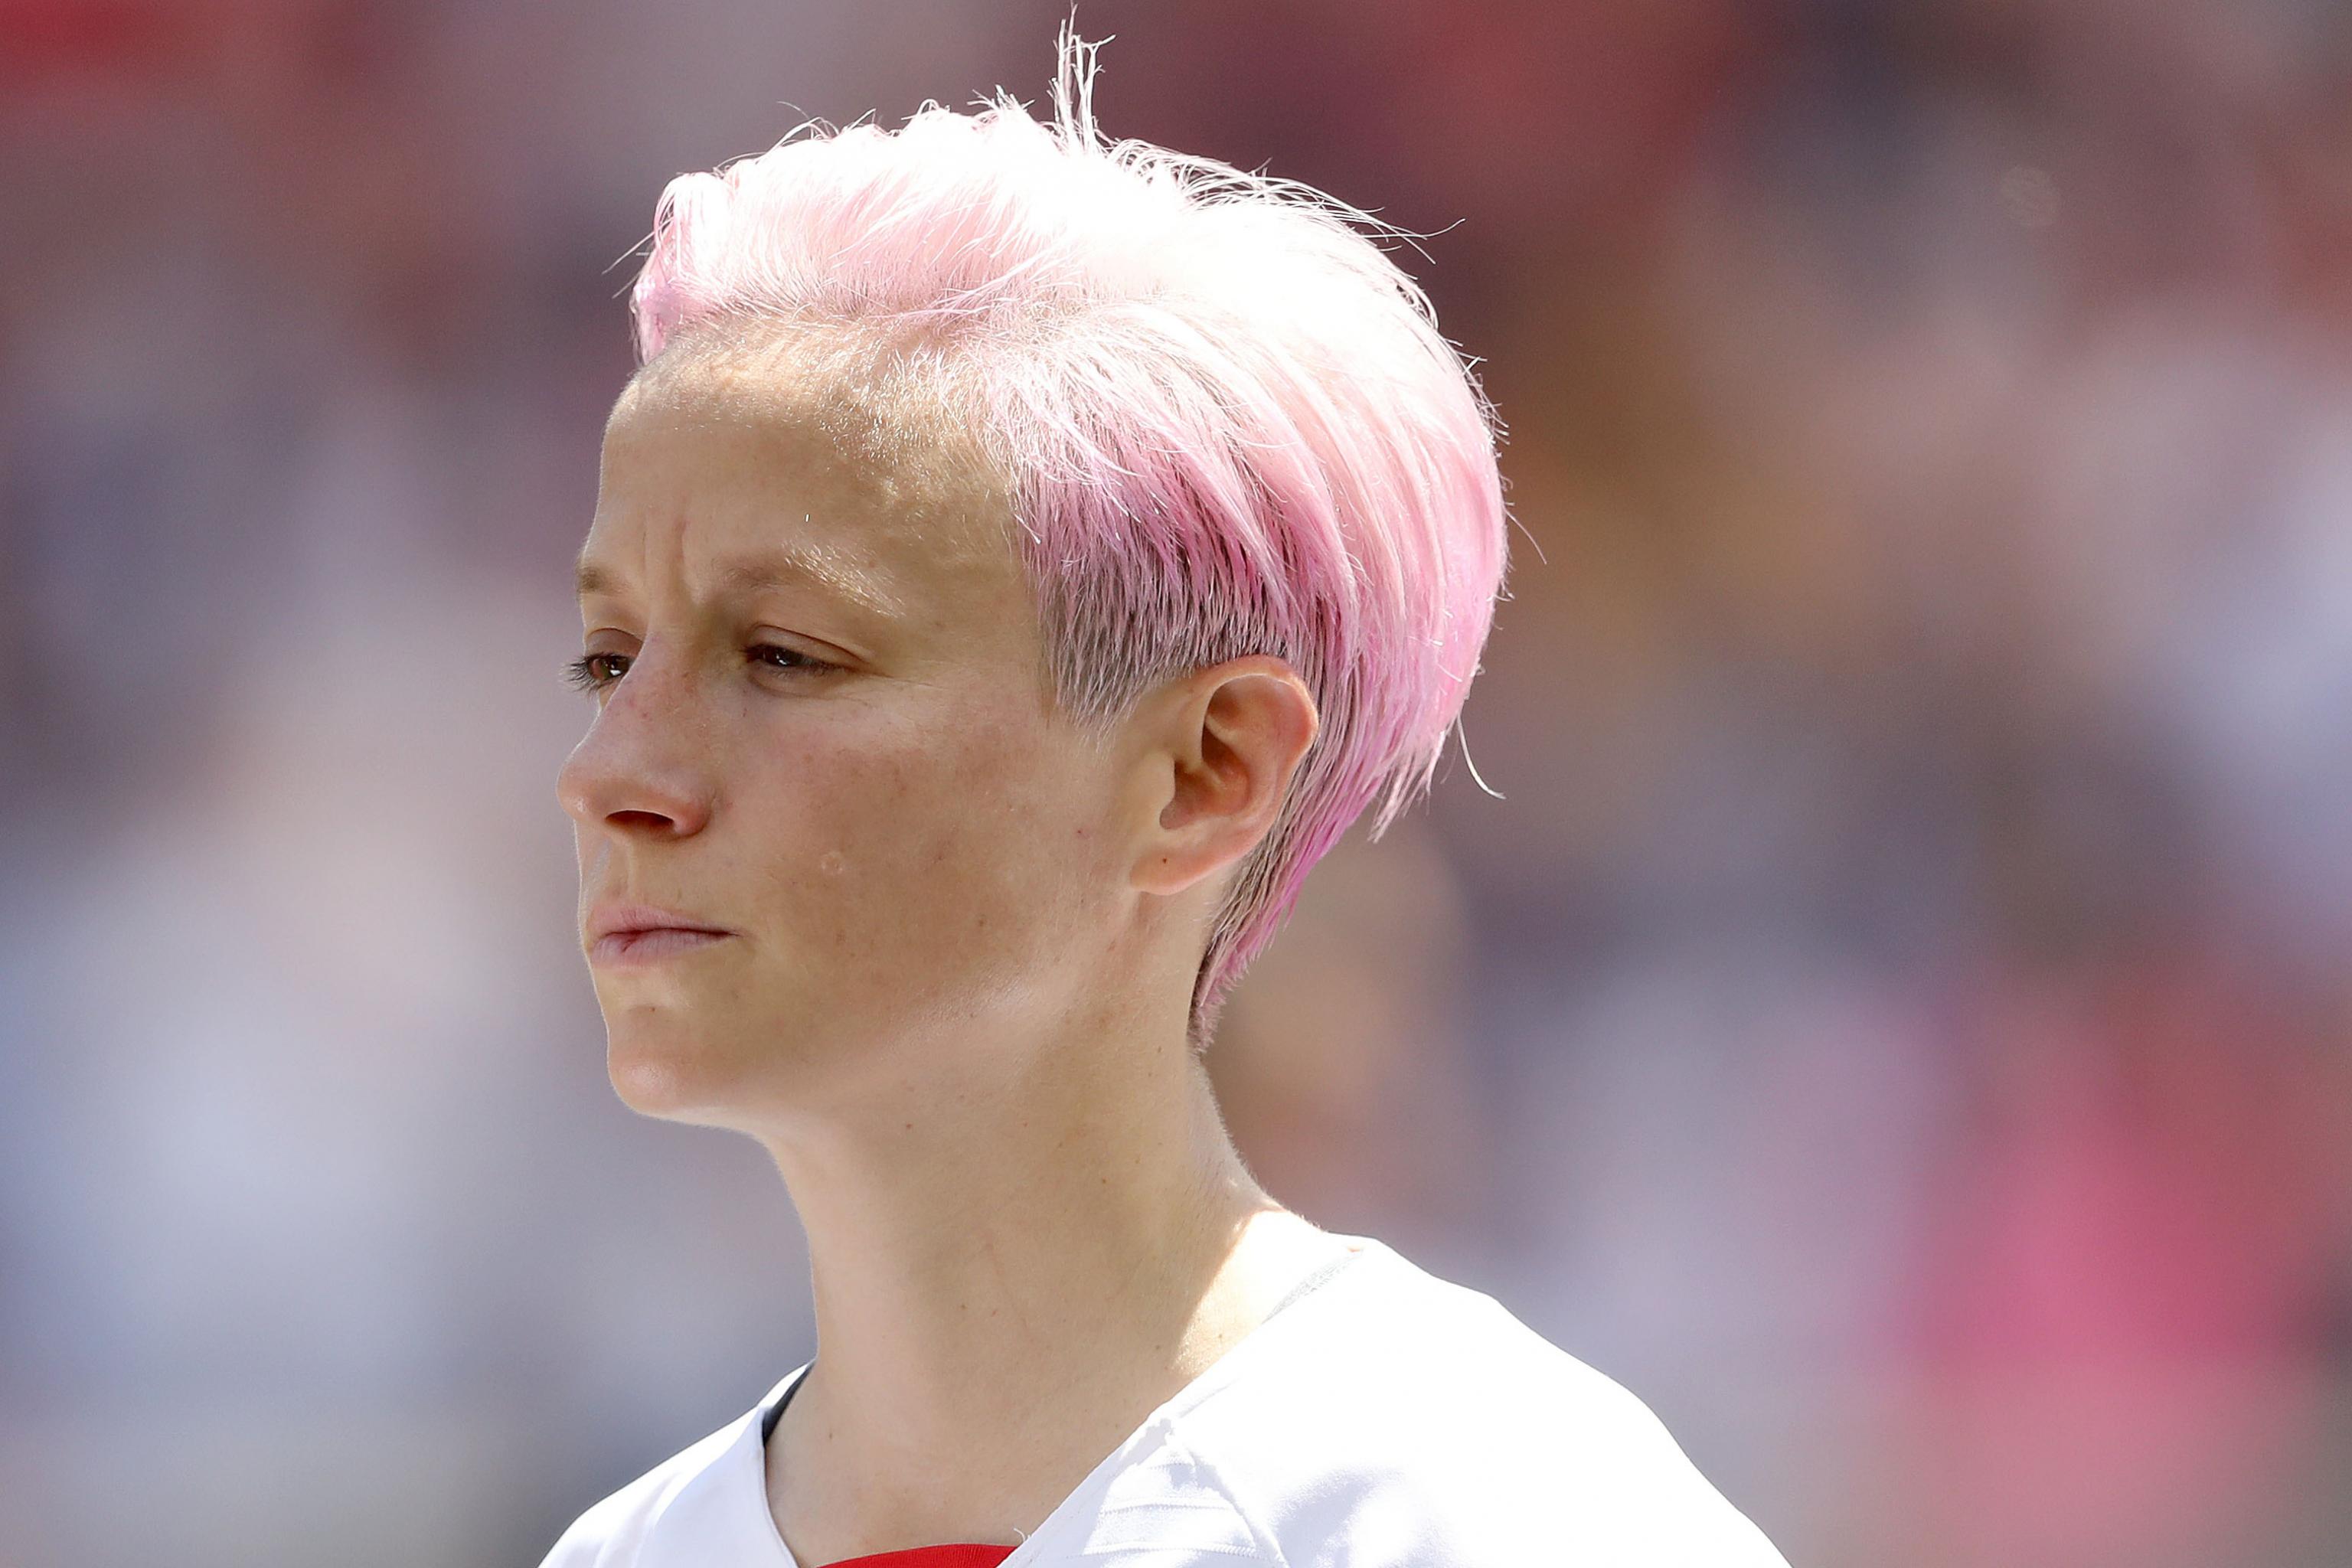 2. Megan Rapinoe's Blue Hair: The Story Behind the Color - wide 7